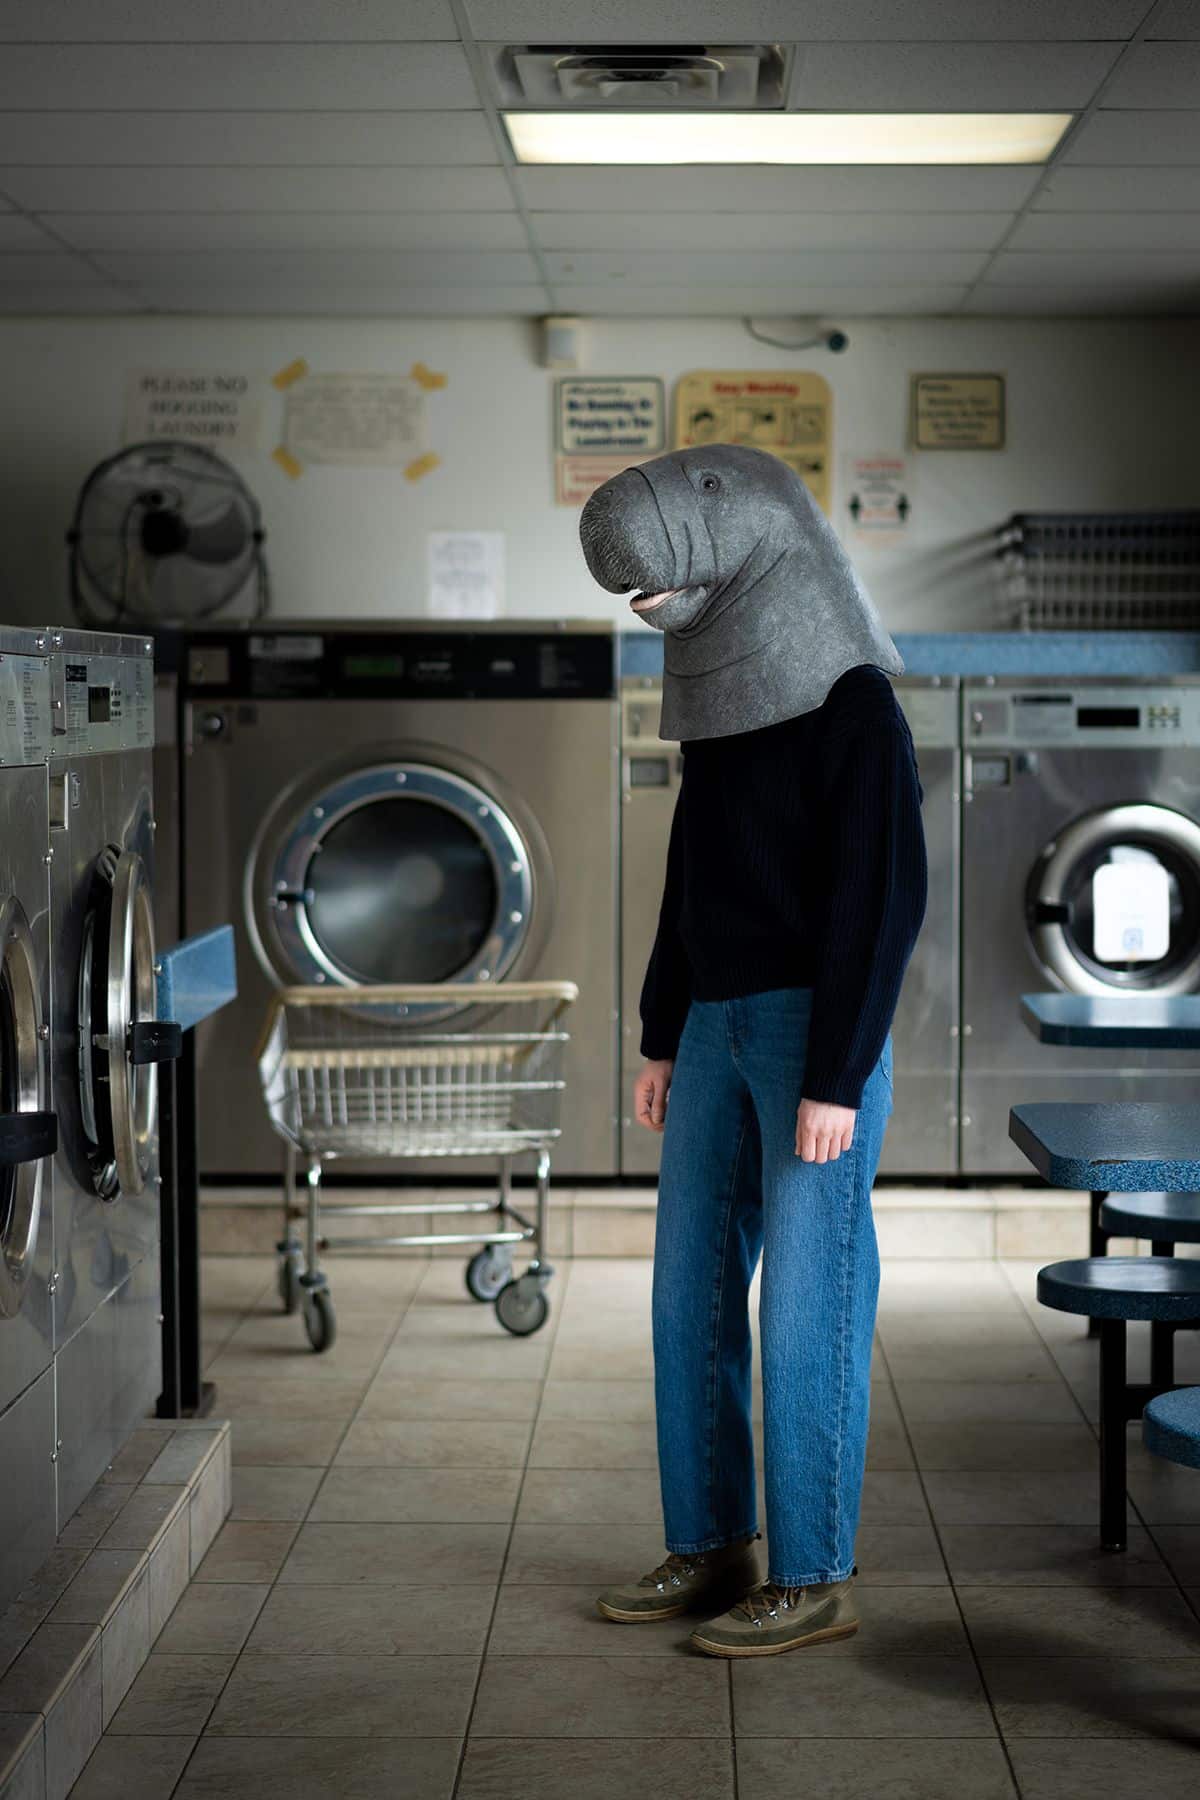 A person in a laundromat wearing a black sweater, blue jeans, and a manatee head head over their head